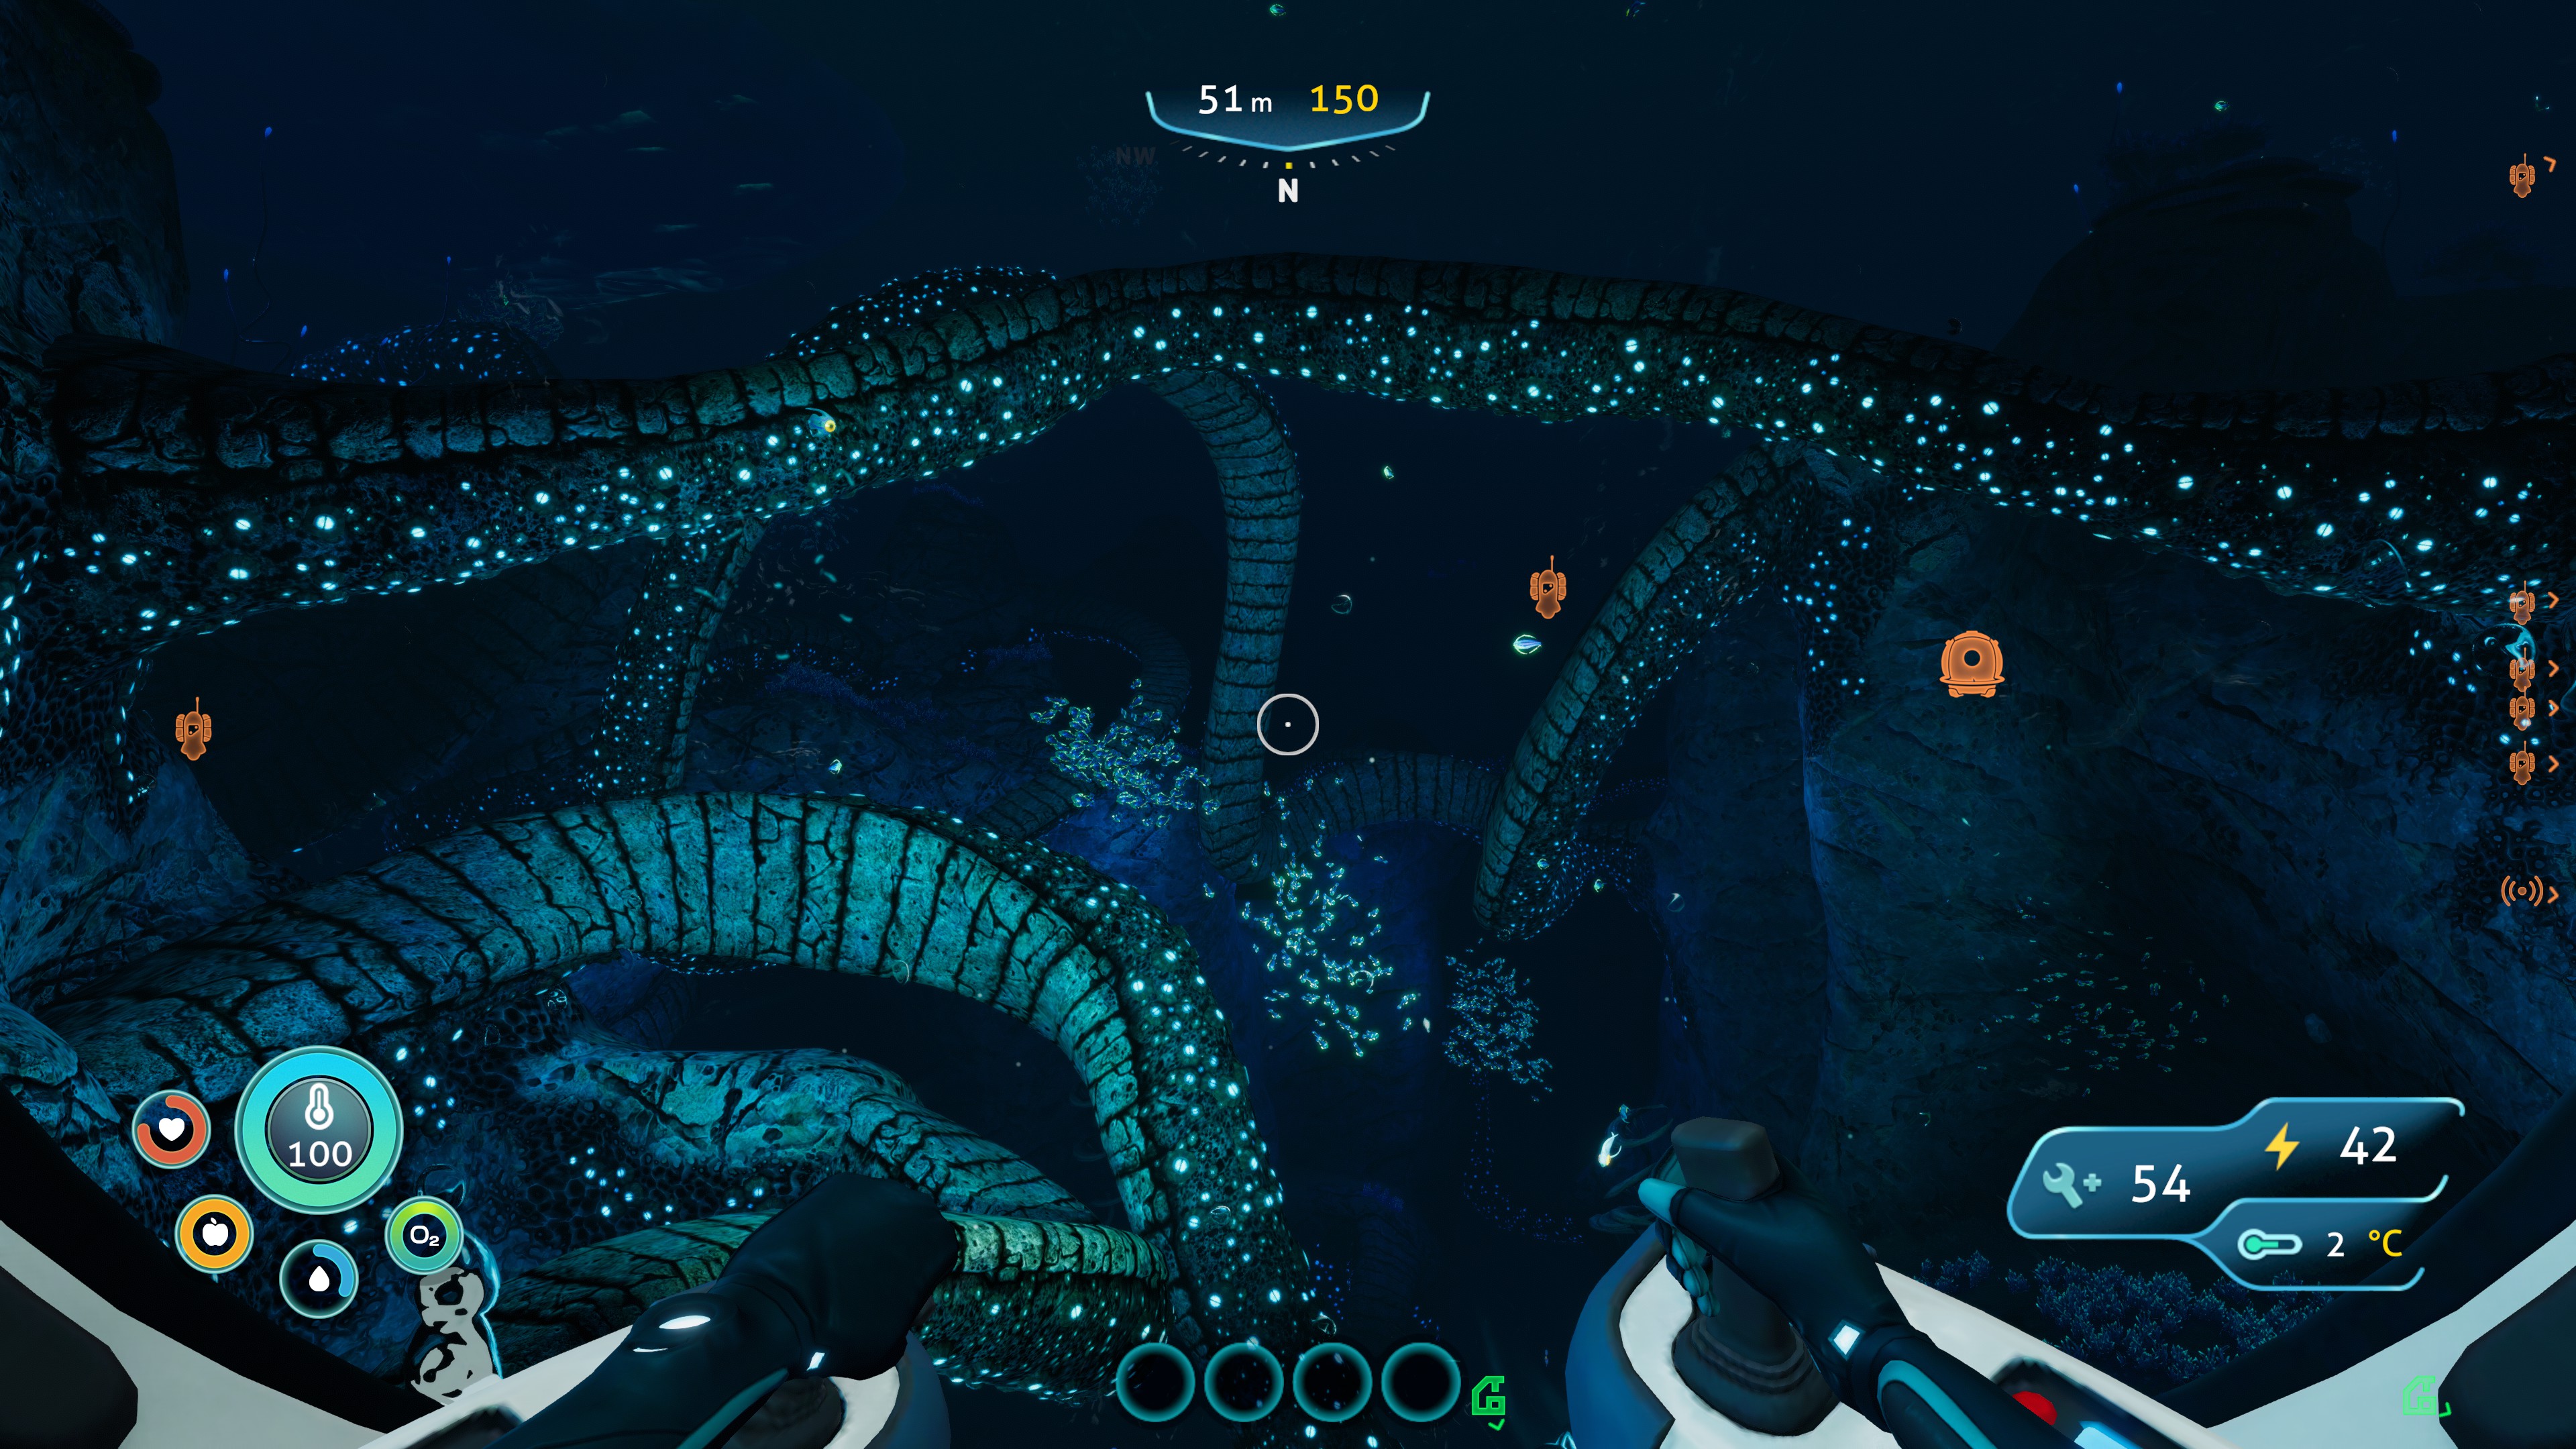 which subnautica game is better